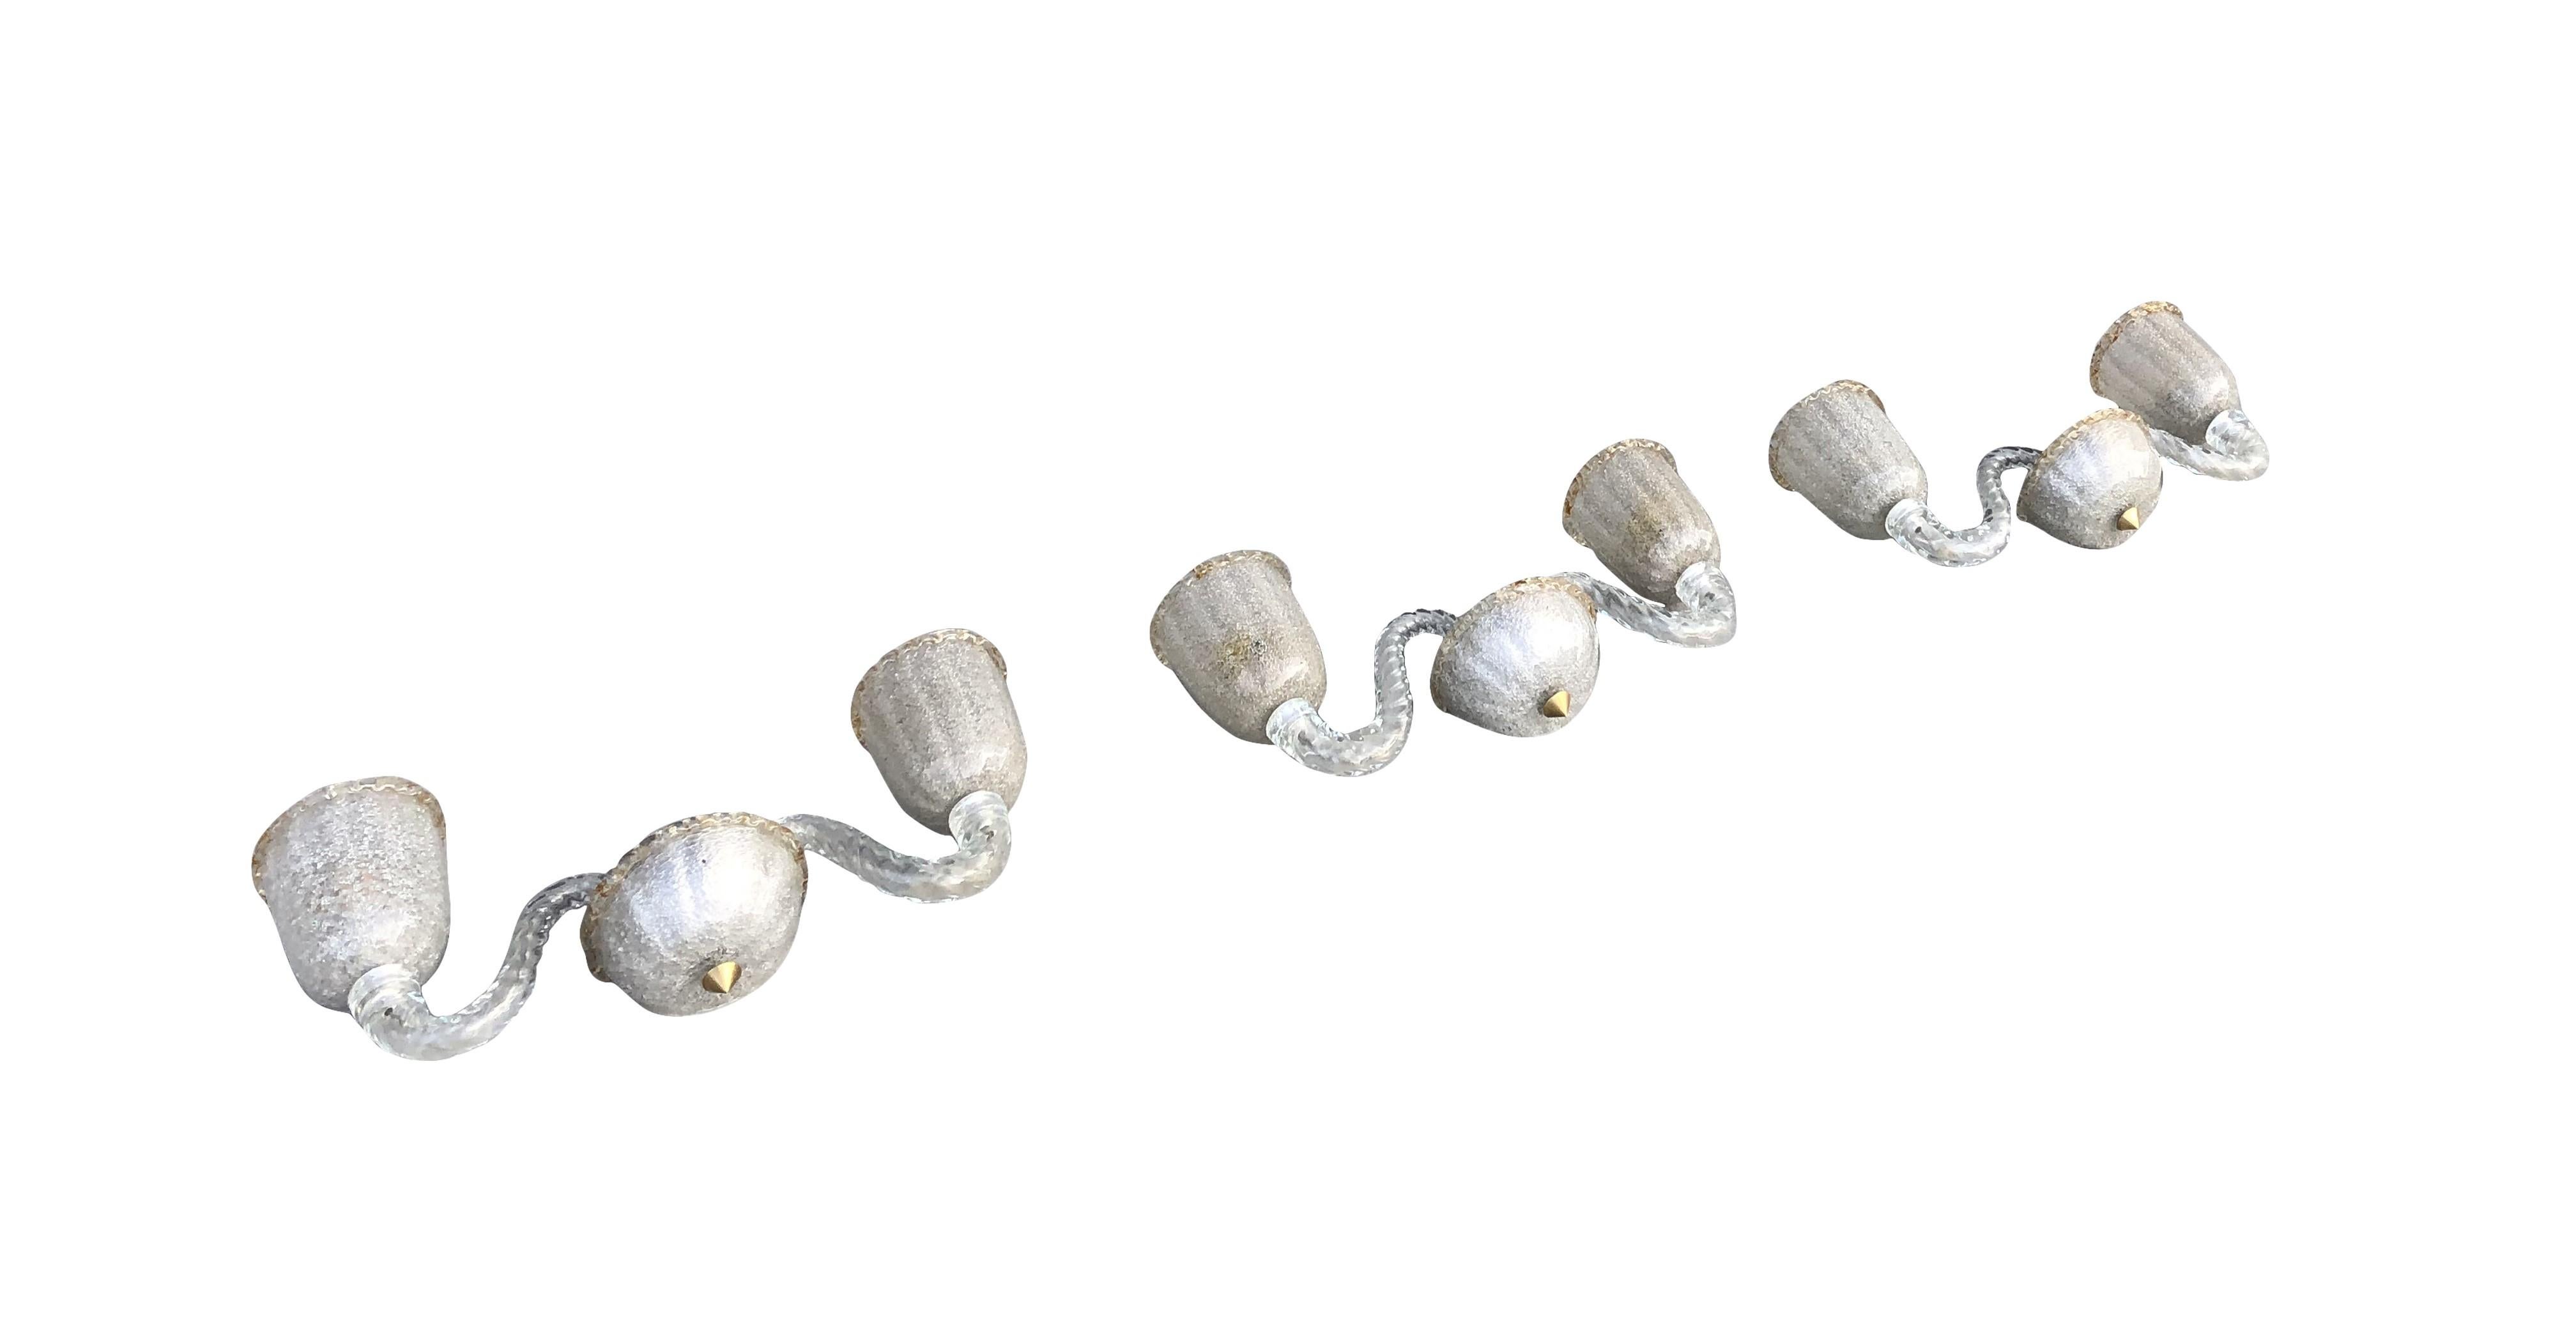 A vintage Mid-Century Modern Italian set of three wall sconces, appliques made of hand blown frosted, smoked stamped Murano glass. Each shade is featuring a one light socket, in good condition. The wires have been renewed. Wear consistent with age